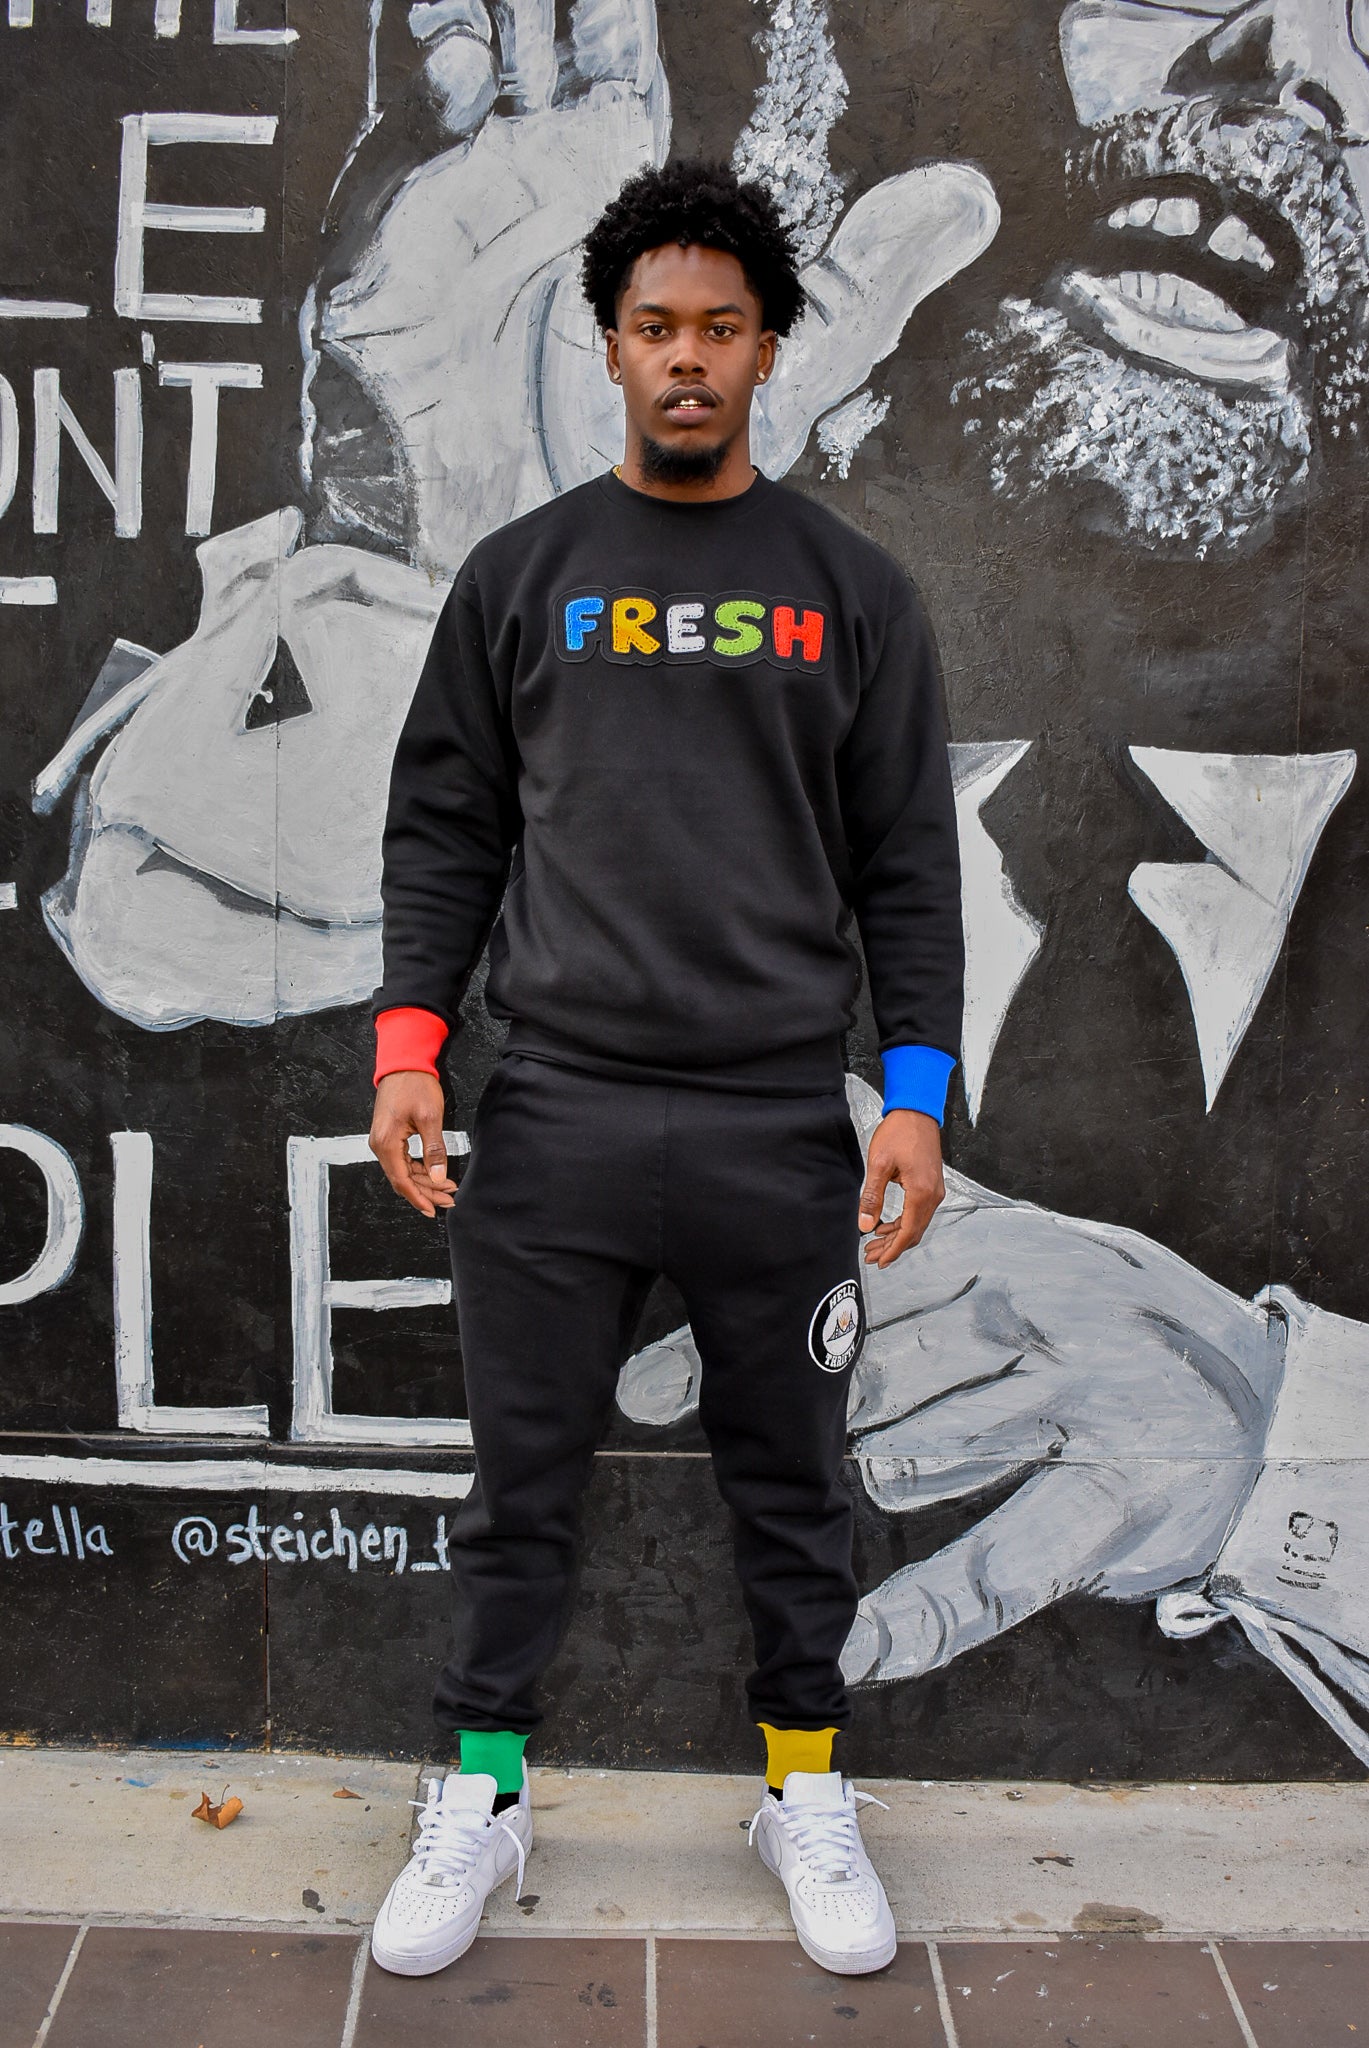 Model wear black crewneck sweatshirt with fresh center chest logo. Sweatshirt has one red cuff and one blue cuff. Sweatpants have one green cuff and one yellow cuff.